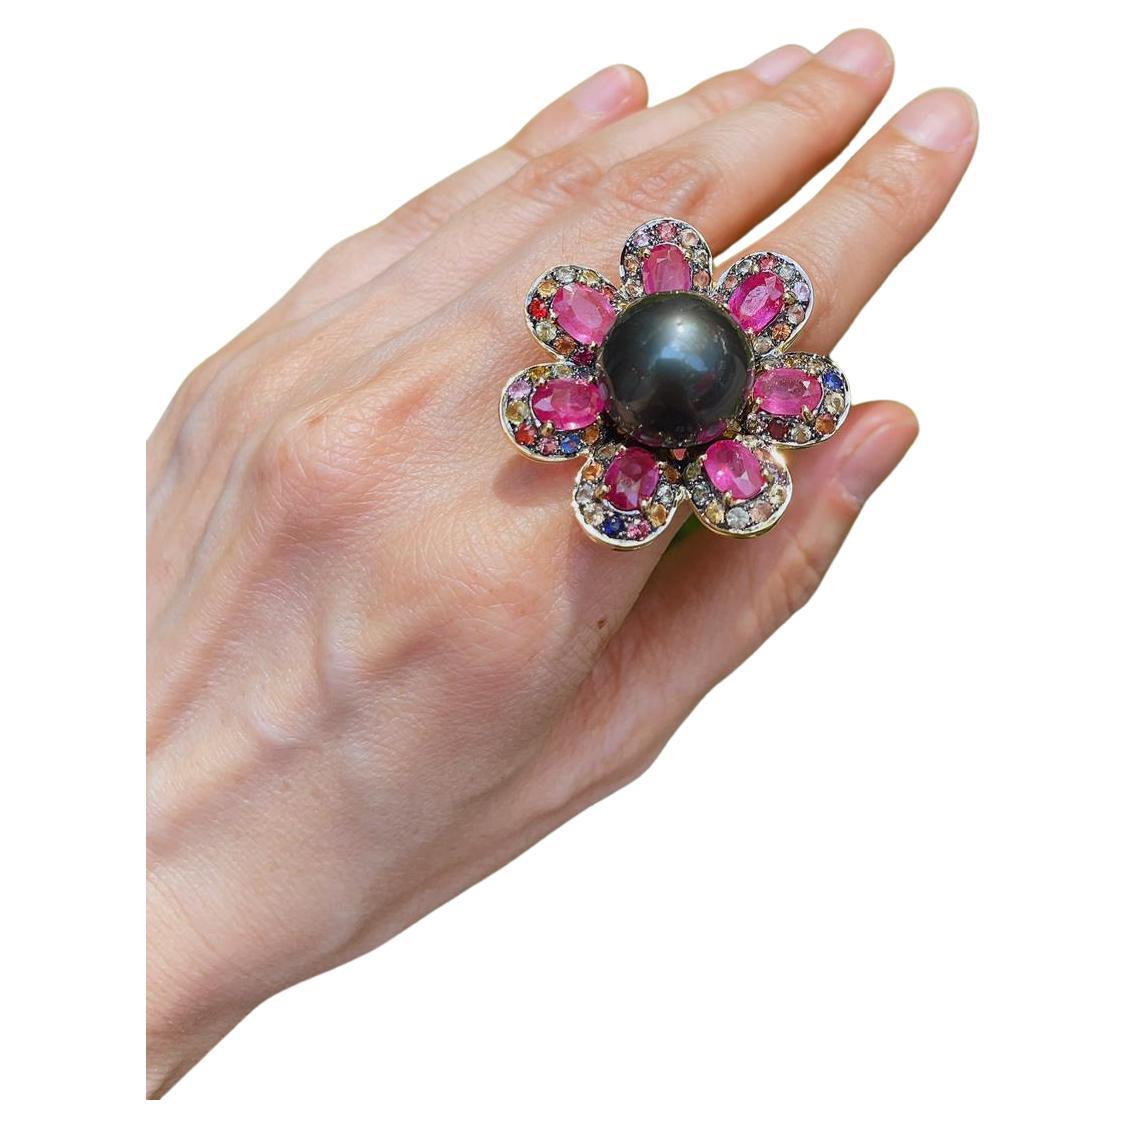 Bochic “Capri” Black Pearl & Pink Sapphire Cocktail Ring Set In 22K Gold & SilveR 
Beautiful Natural Tahiti Black Pearl
Natural Multi Color Sapphires from Sri Lanka - 3 carats 
Round and oval brilliant shapes 
Pink sapphire - Oval shapes 
This Rings